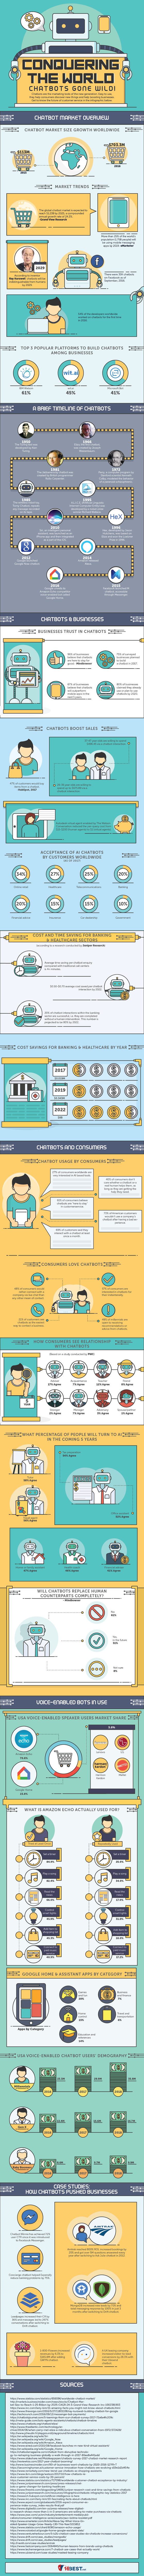 Conquering The World – Chatbots Gone Wild #infographic